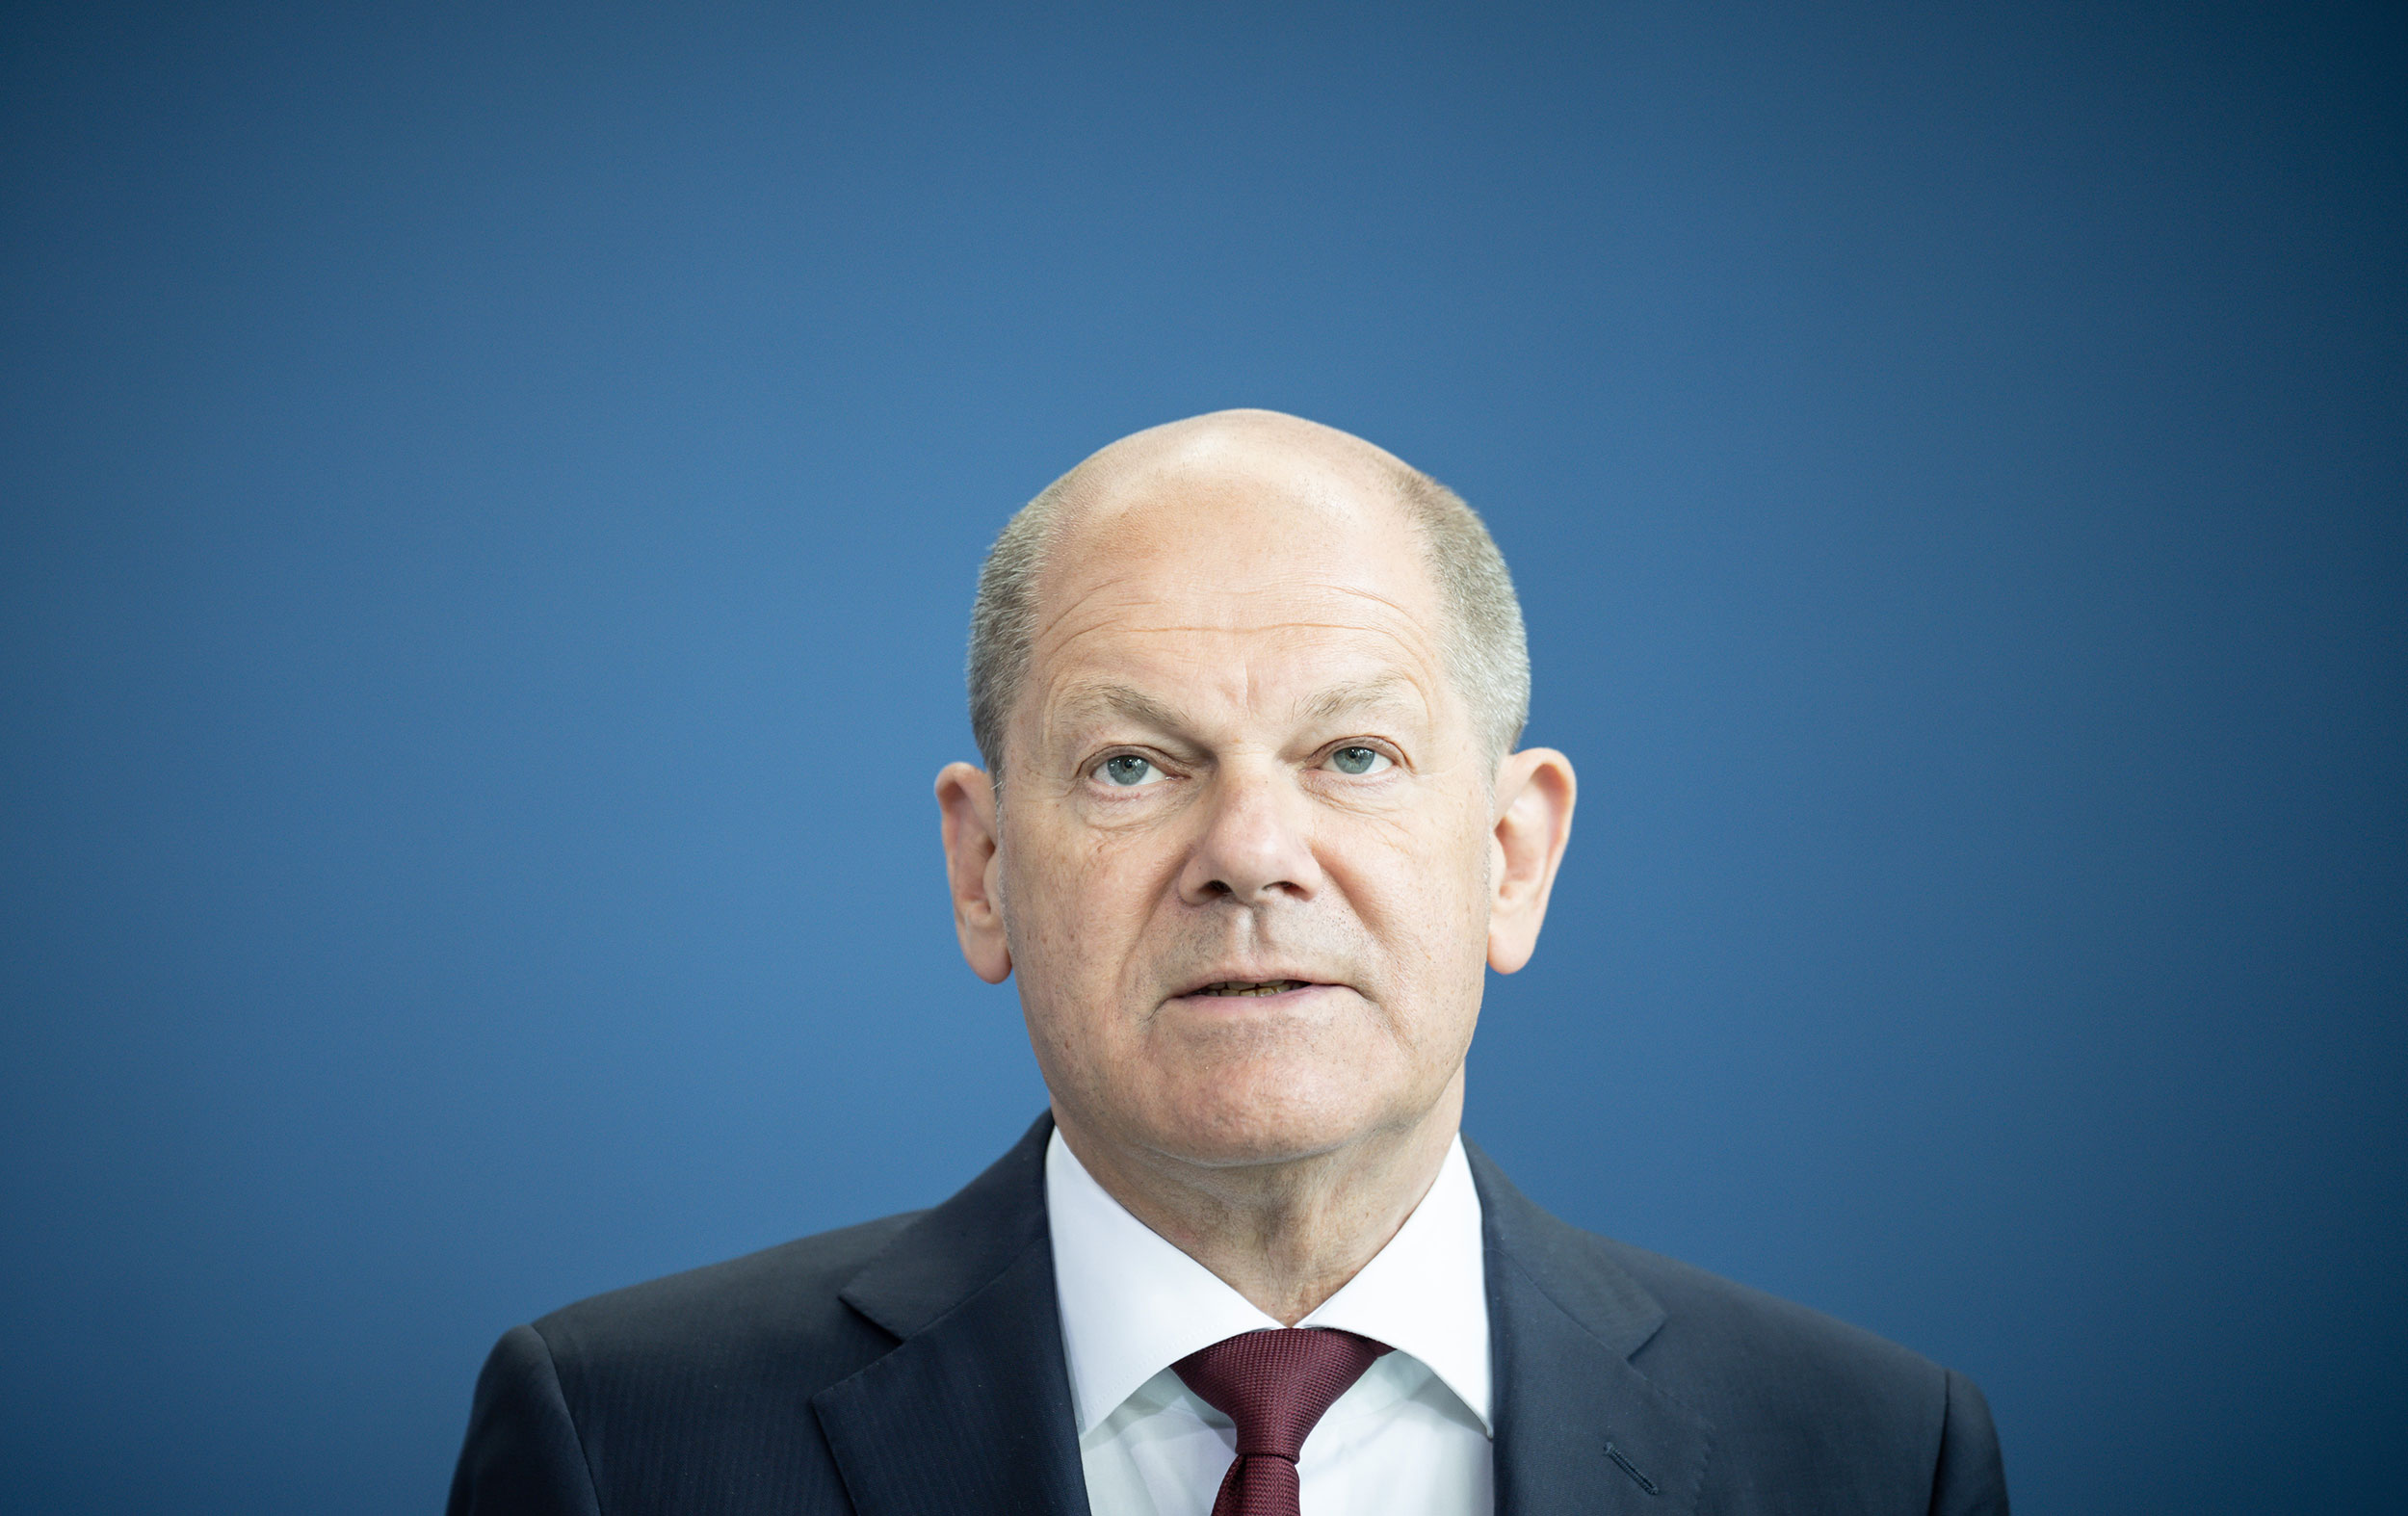 German Chancellor Olaf Scholz speaks at a press conference with Indian Prime Minister Narendra Modi in Berlin on May 2.